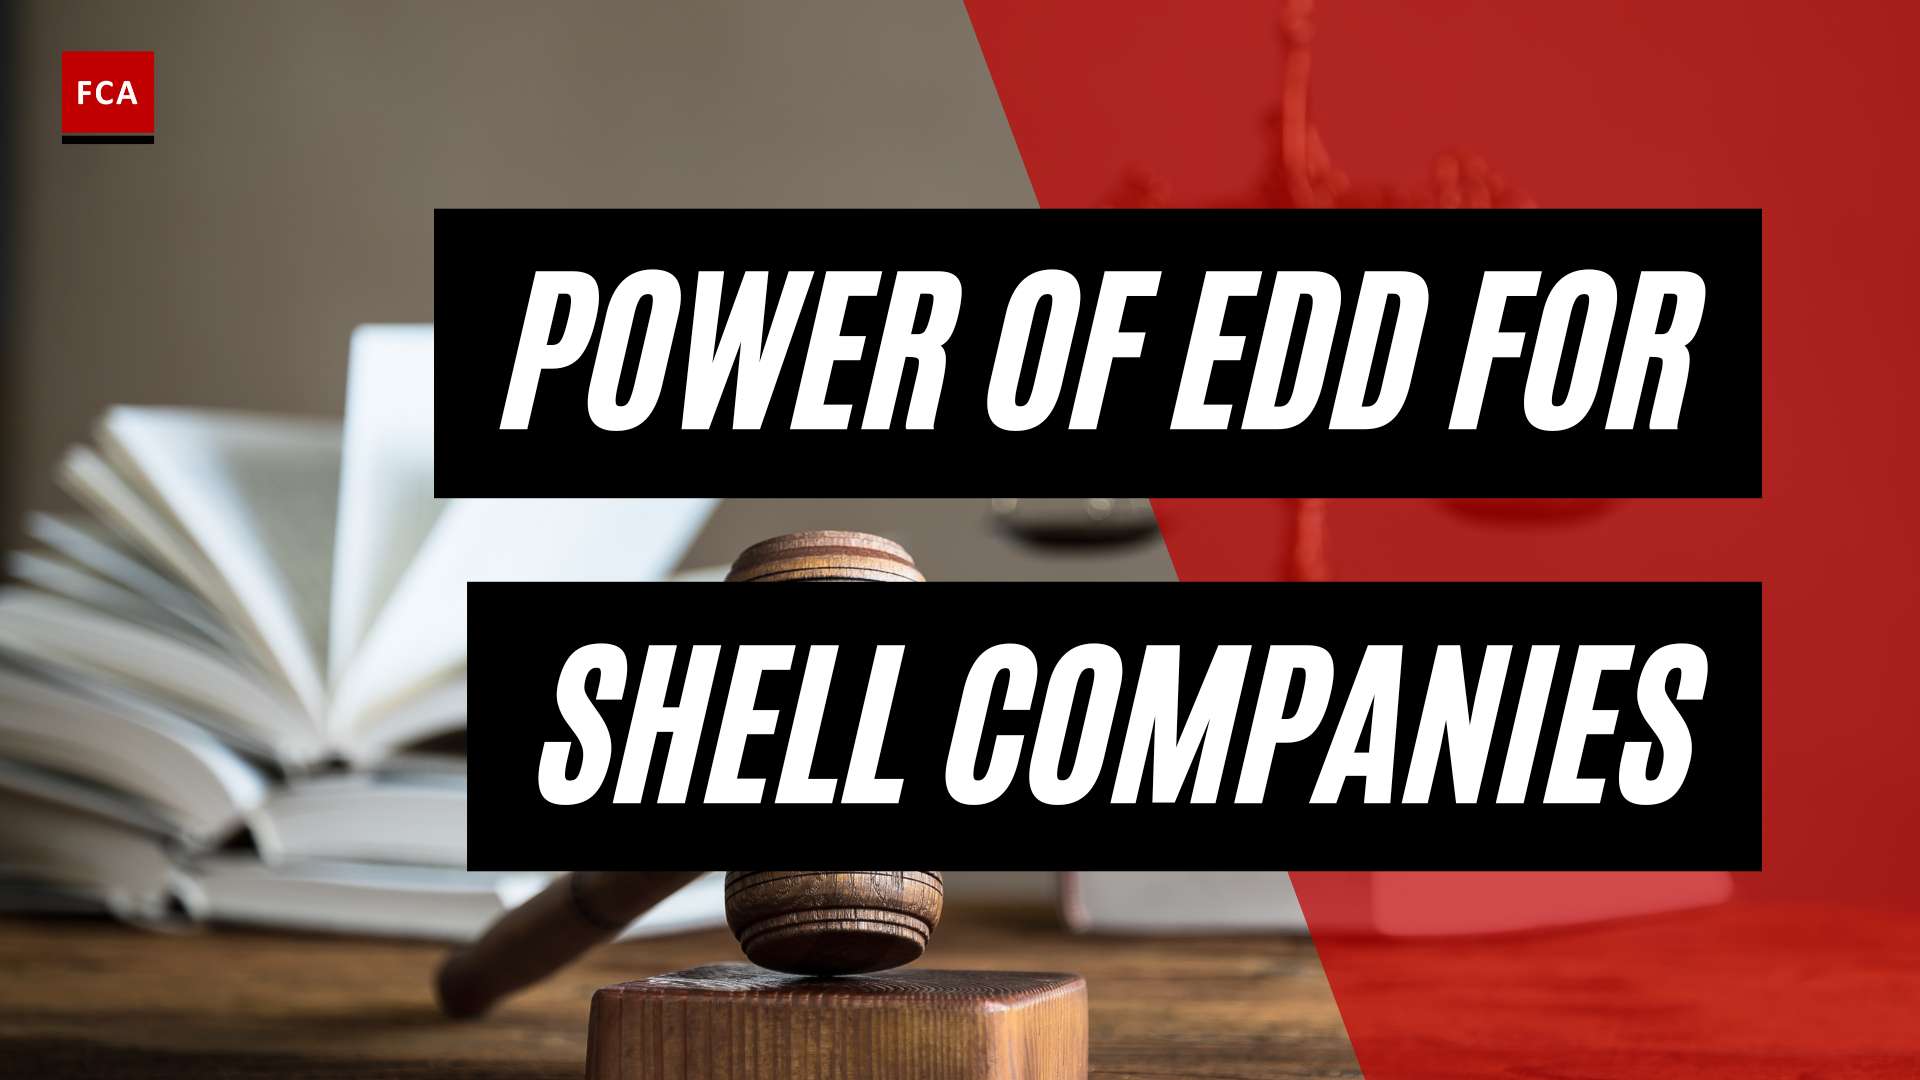 Strengthening Aml Compliance: The Power Of Edd For Shell Companies